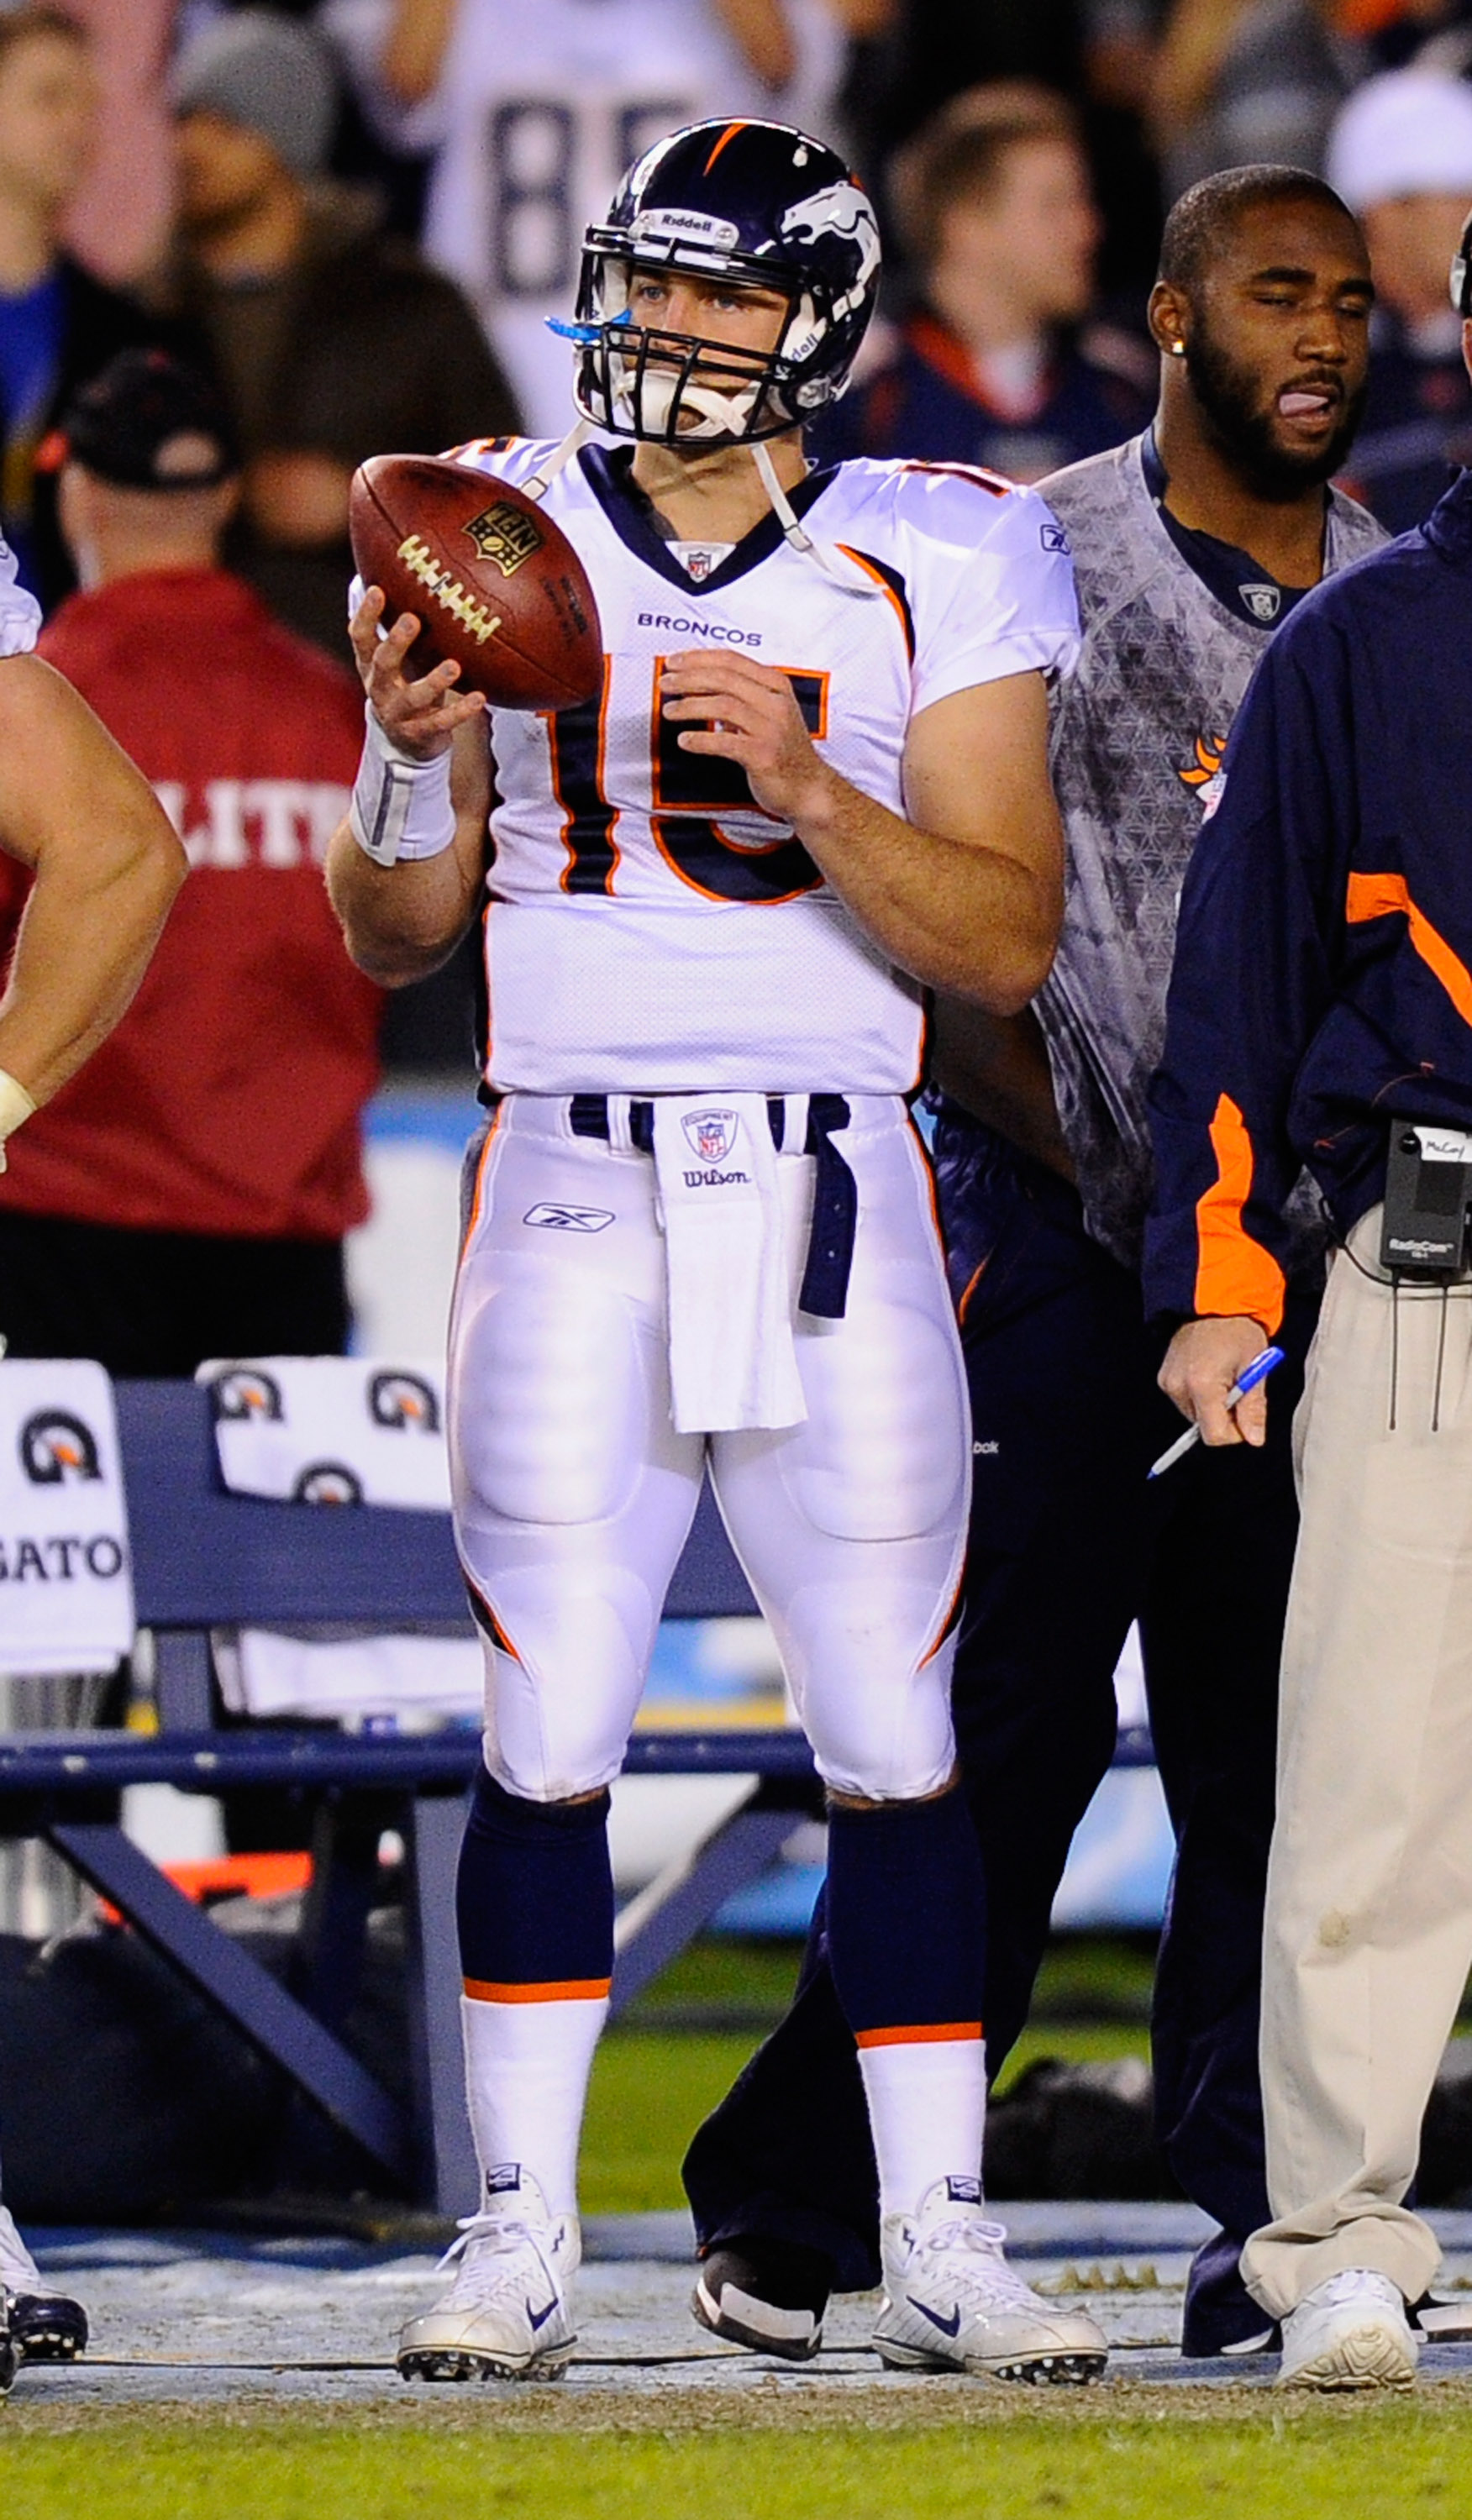 SAN DIEGO - NOVEMBER 22: Quarterback Tim Tebow #15 of the Denver Broncos tosses the footbal on the sideline during the football game against the San Diego Chargers at Qualcomm Stadium on November 22, 2010 in San Diego, California. Chargers defeated the Br